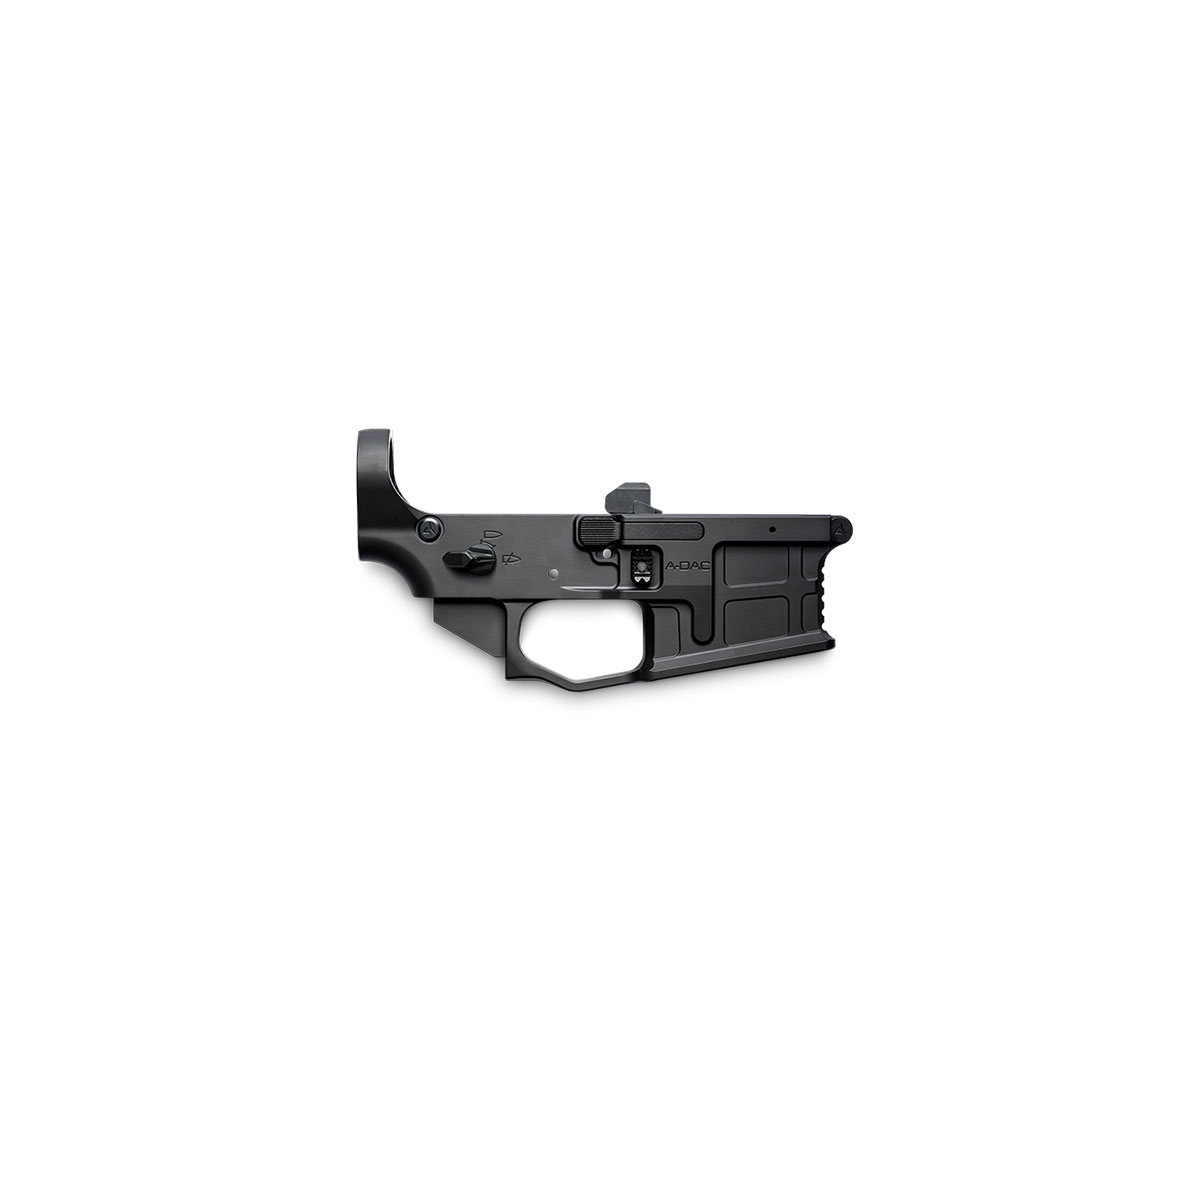 RADIAN WEAPONS - A-DAC 15 AMBIDEXTROUS LOWER RECEIVER